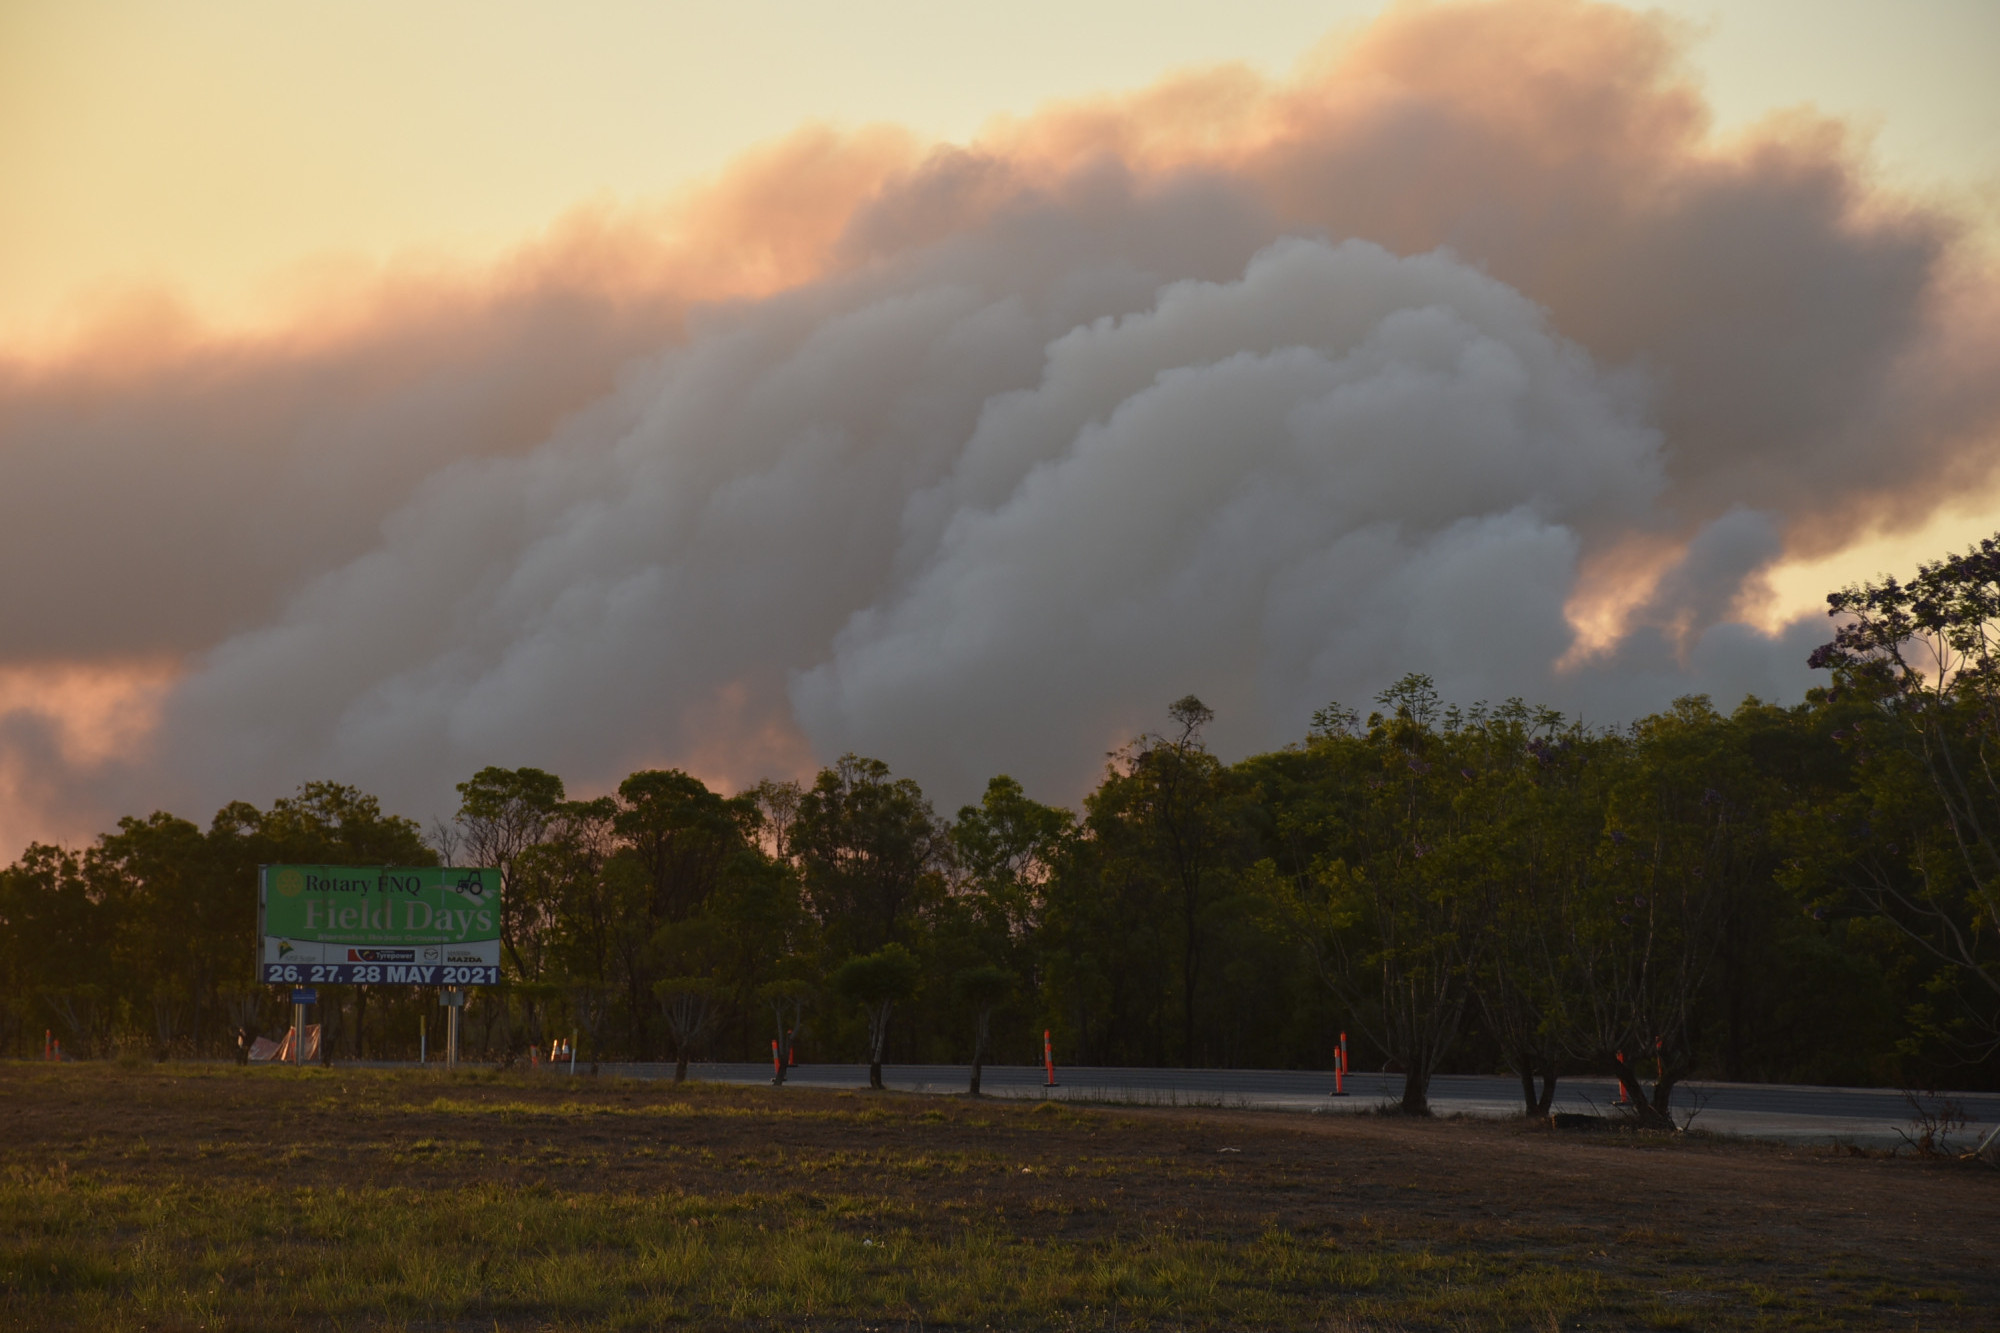 Hot dry winds in Mareeba resulted in two consecutive days where Mareeba residents were warned to get ready to leave their homes due to local bushfires.